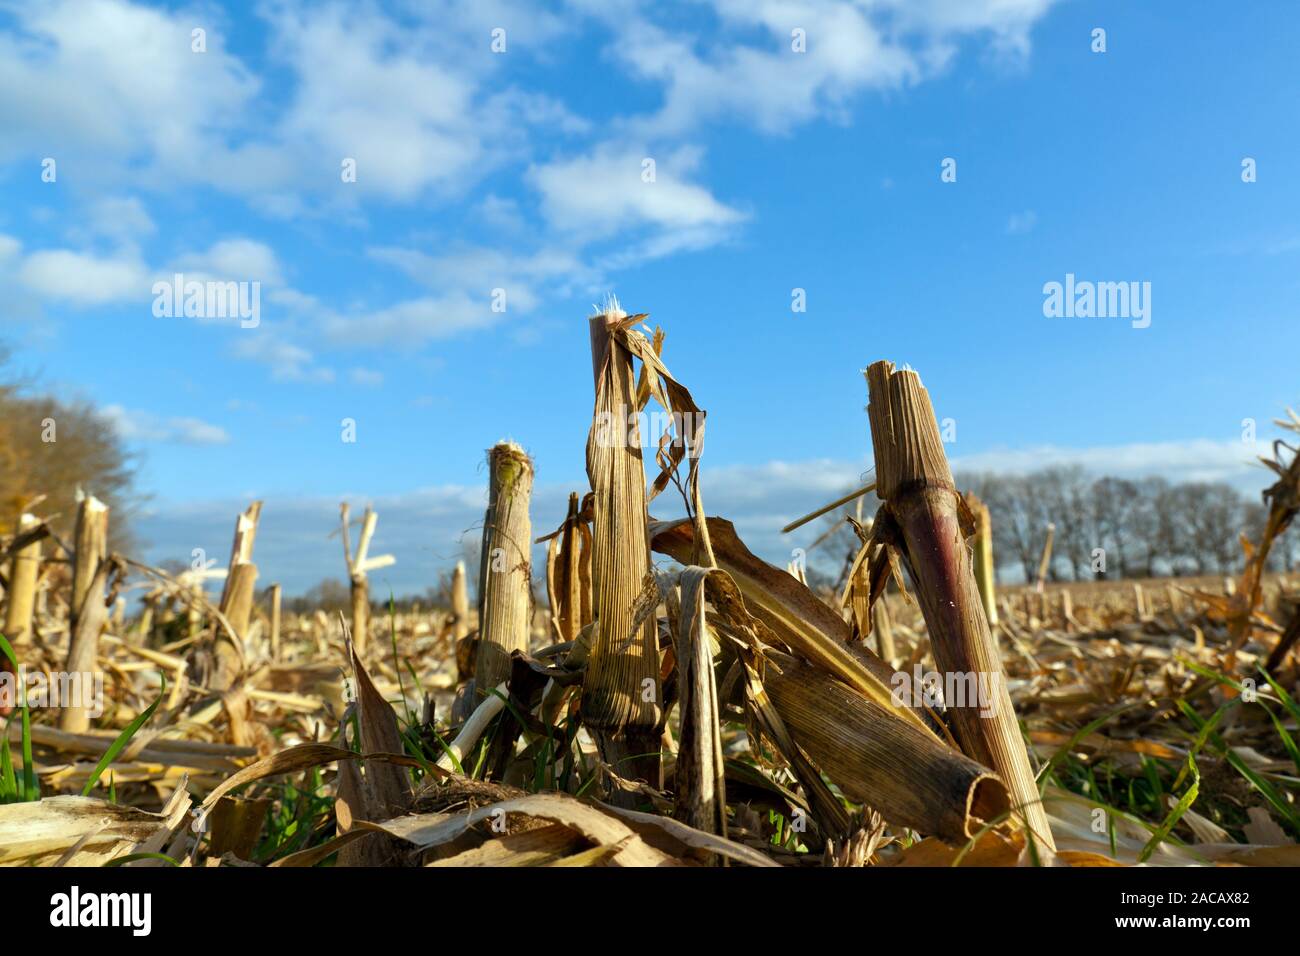 Field in agriculture after harvesting Stock Photo